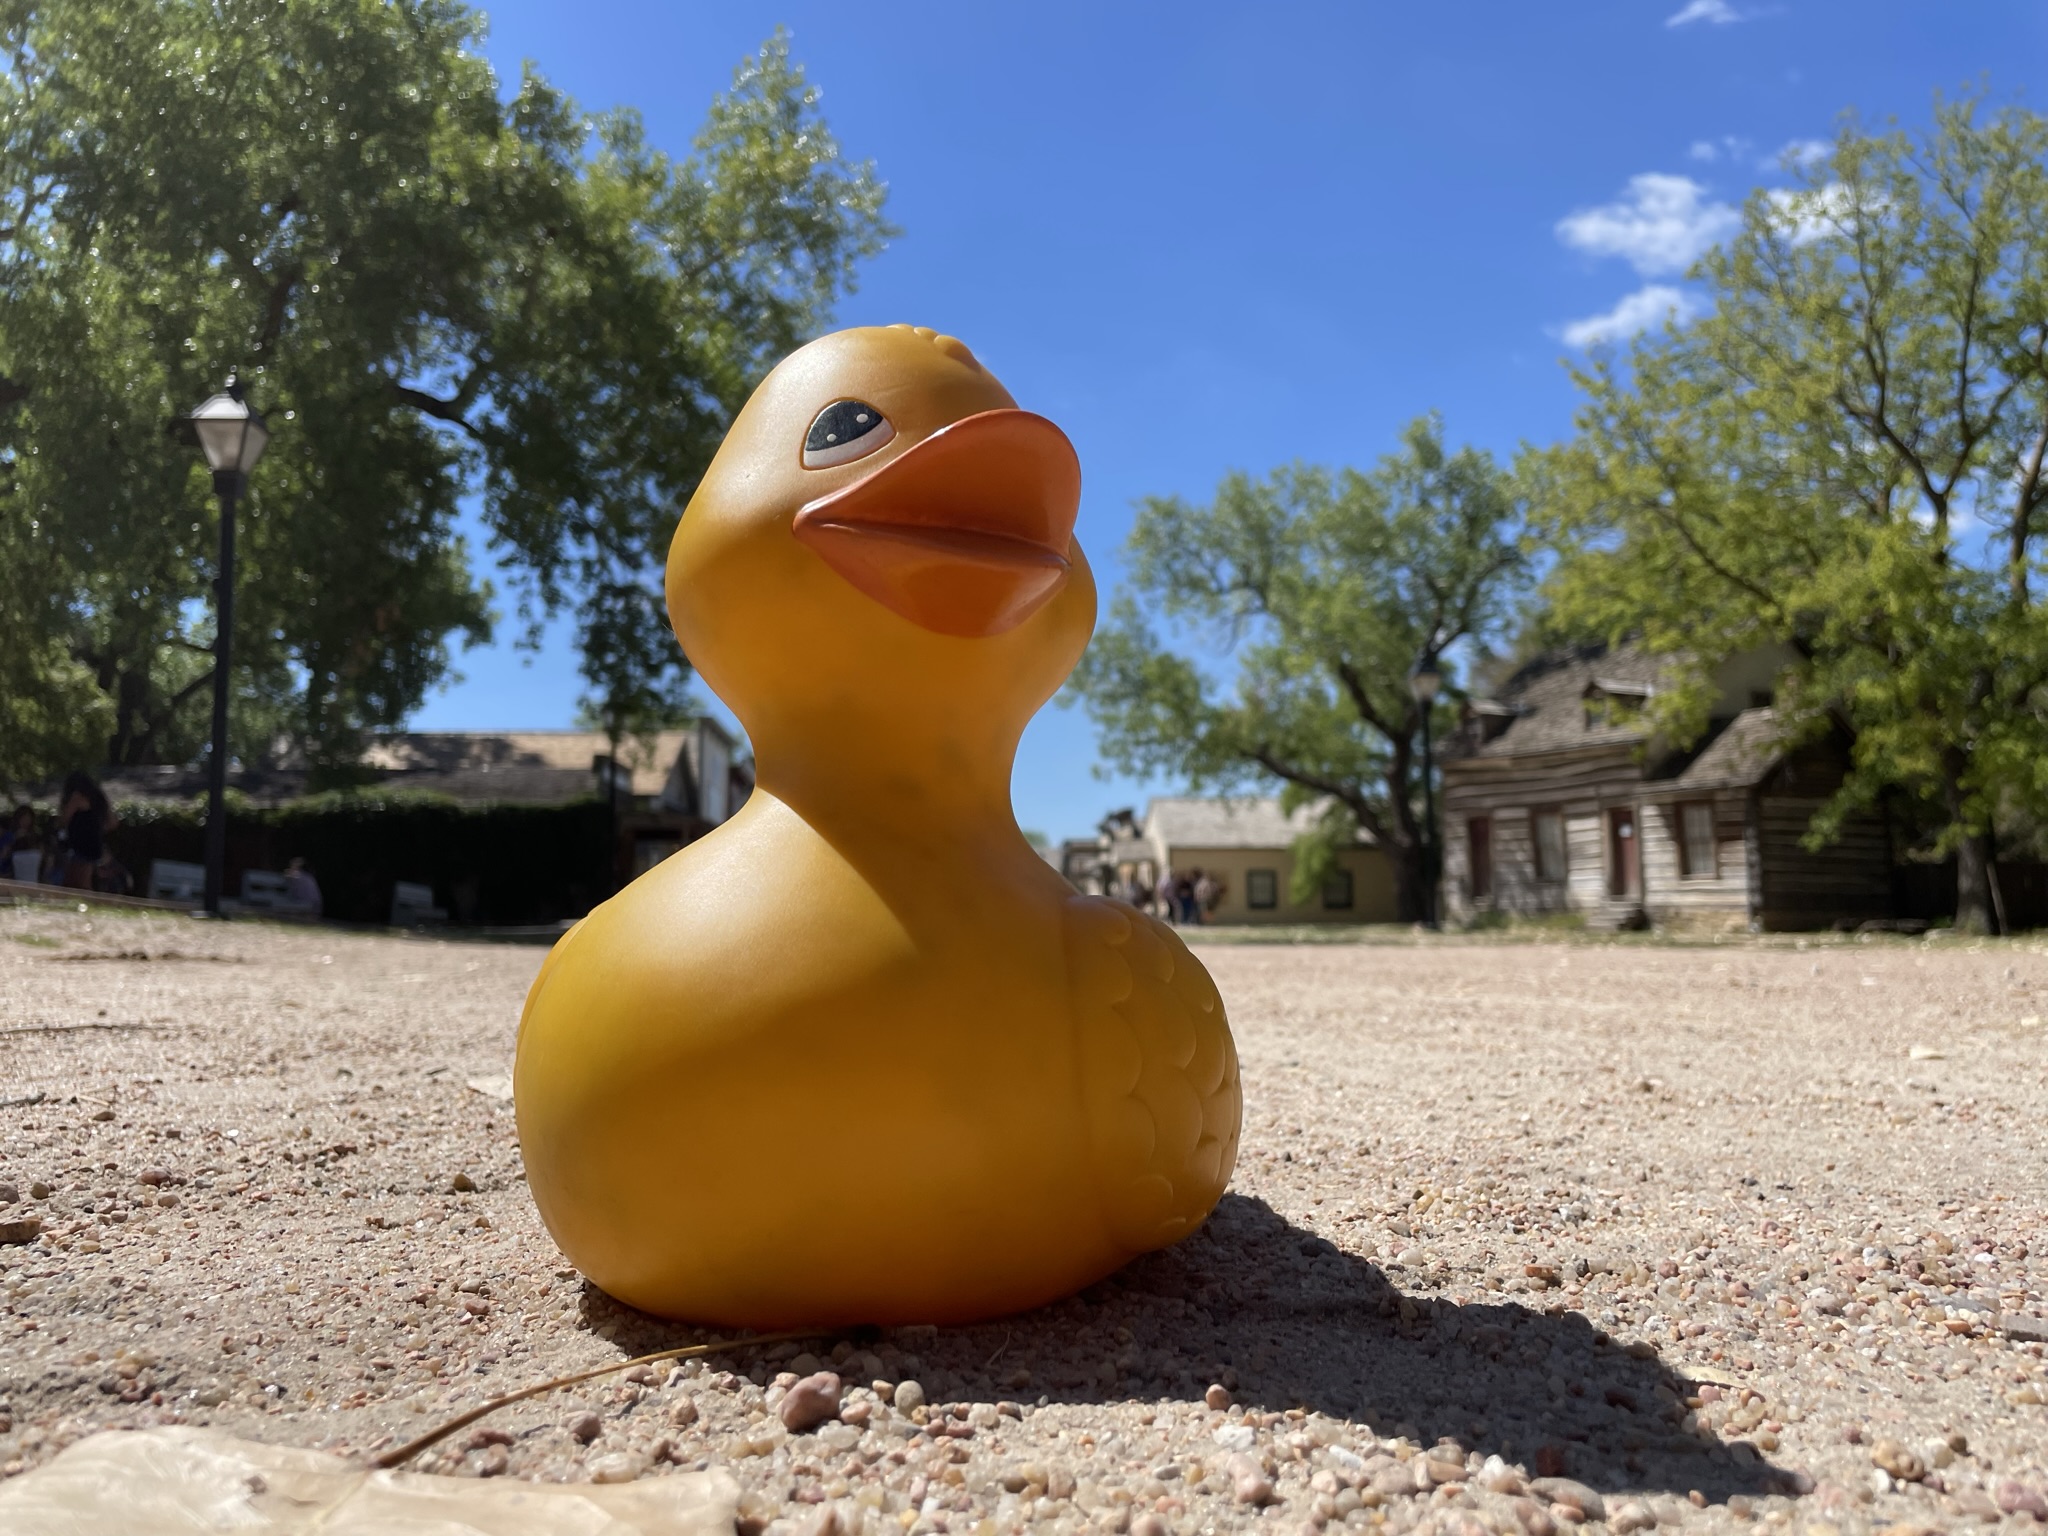 The Ducking Images, Fall 2022 Edition 24